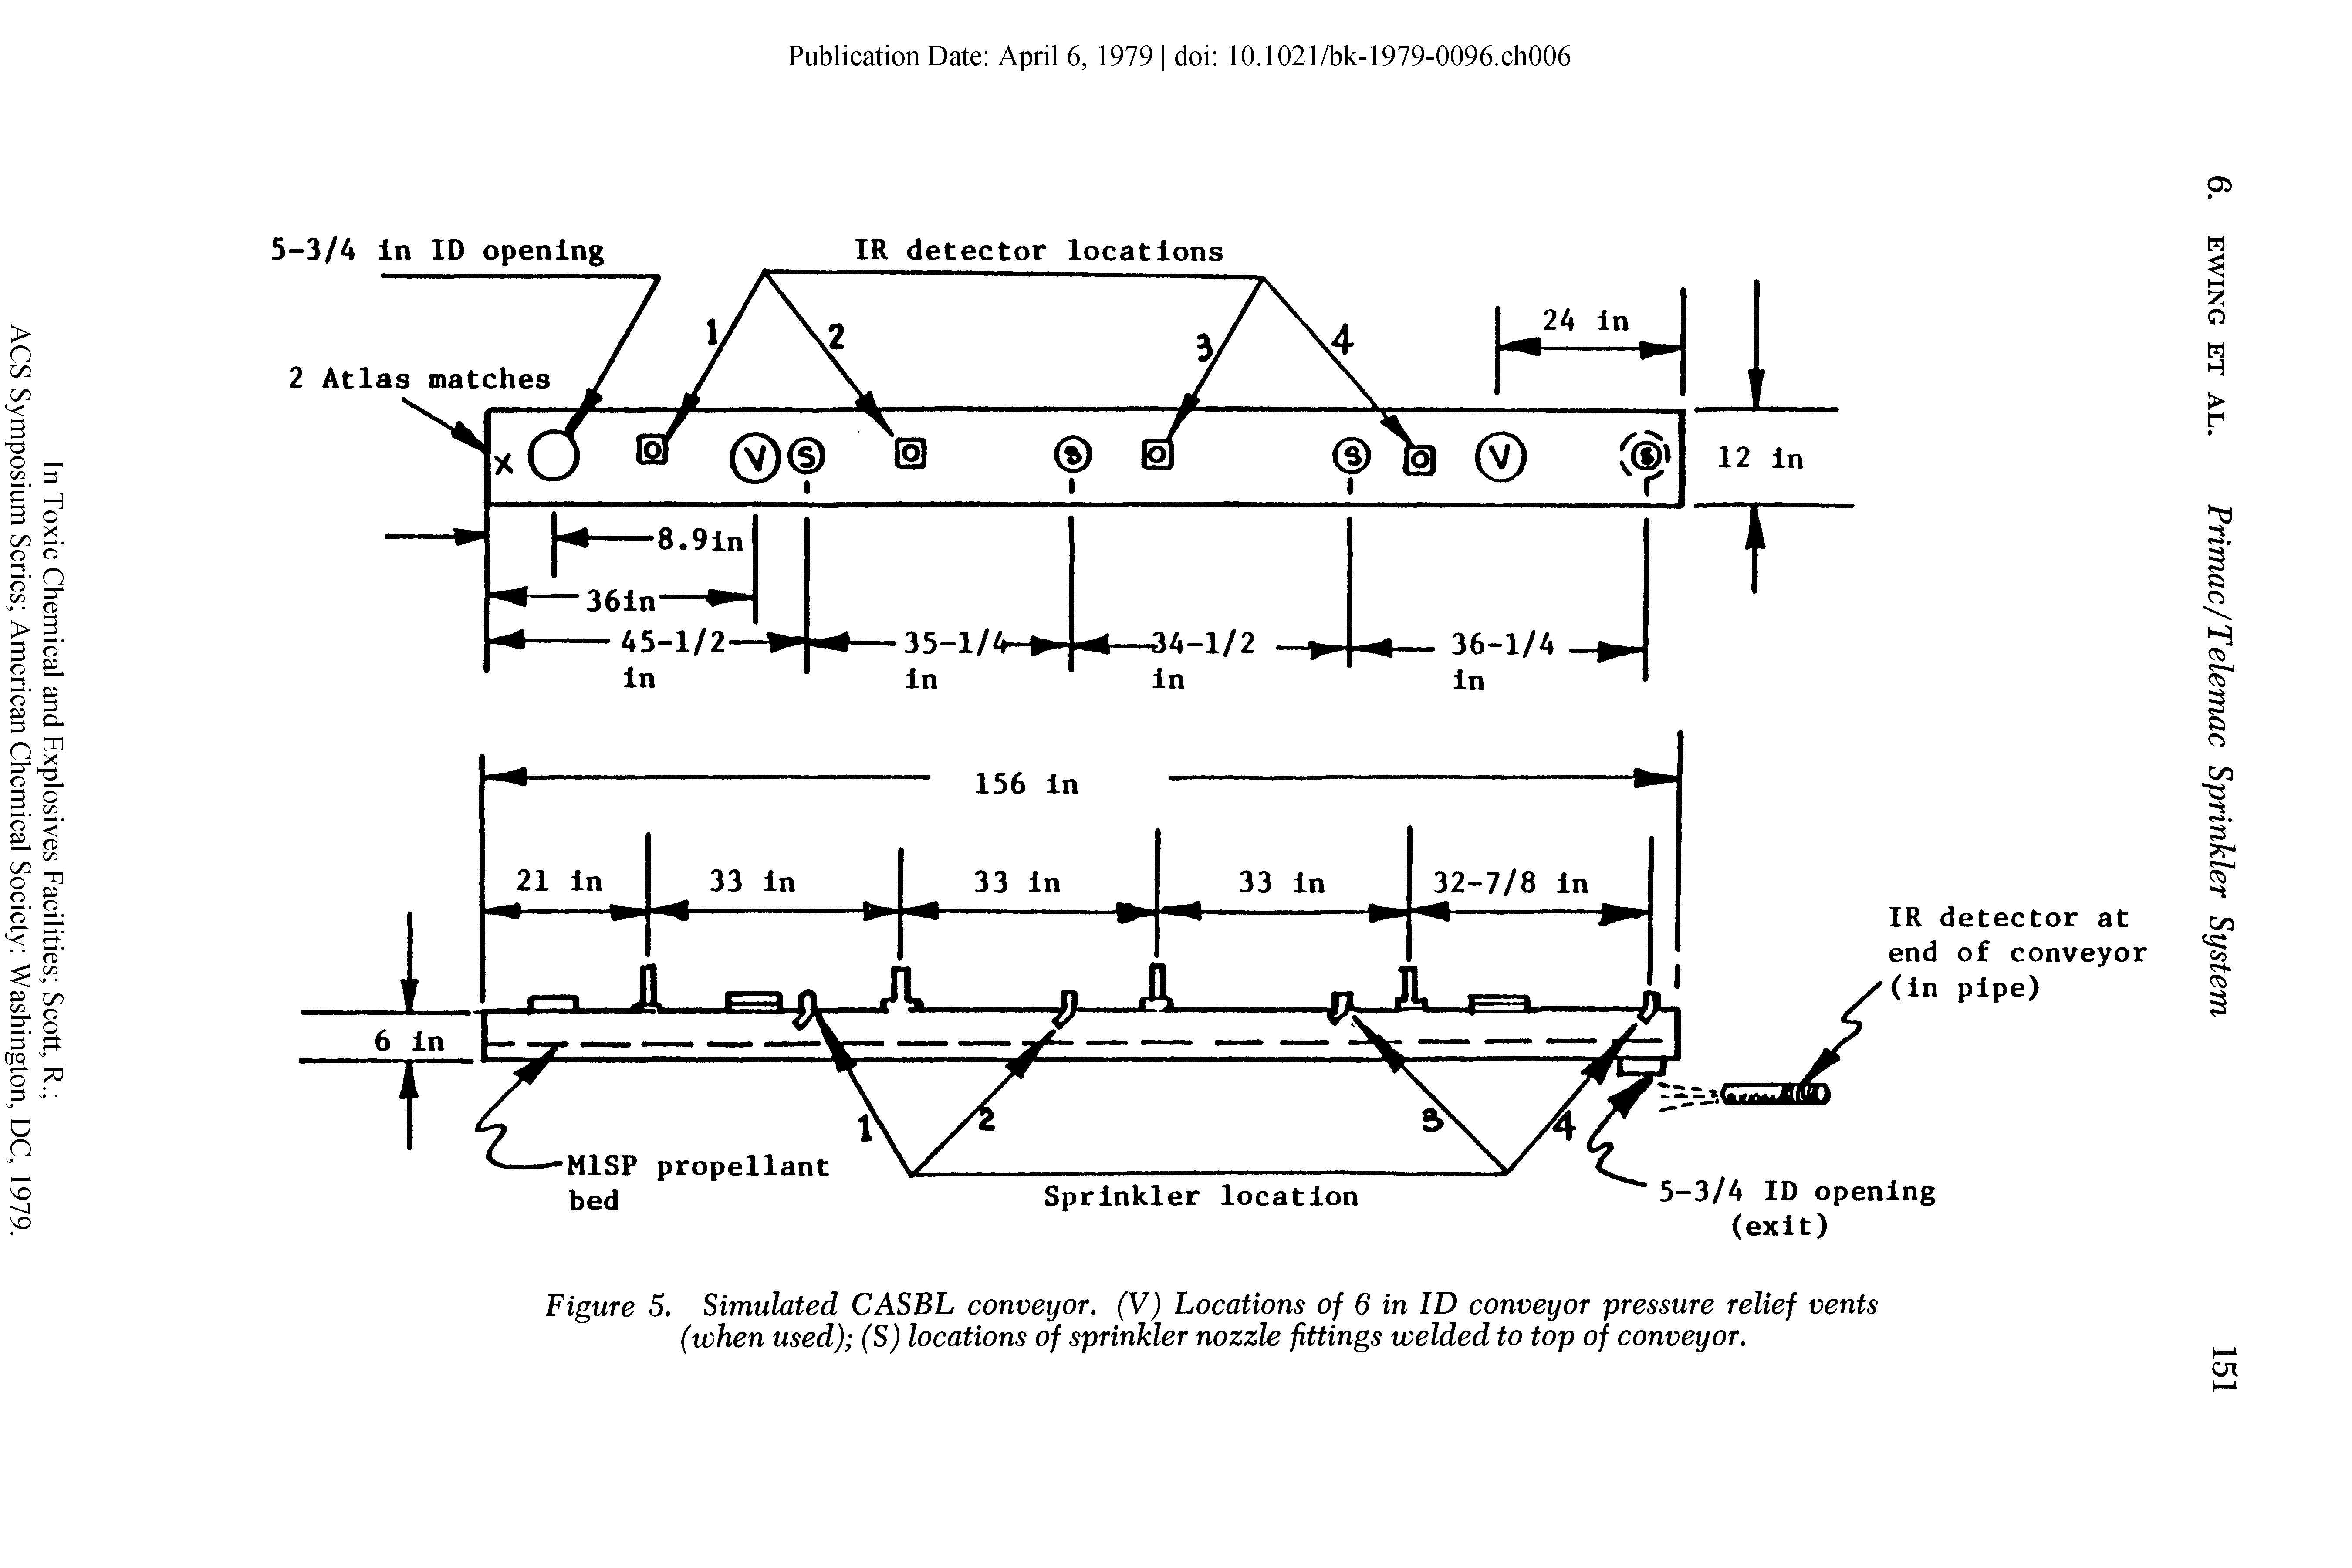 Figure 5. Simulated CASBL conveyor. (V) Locations of 6 in ID conveyor pressure relief vents (when used) (S) locations of sprinkler nozzle fittings welded to top of conveyor.